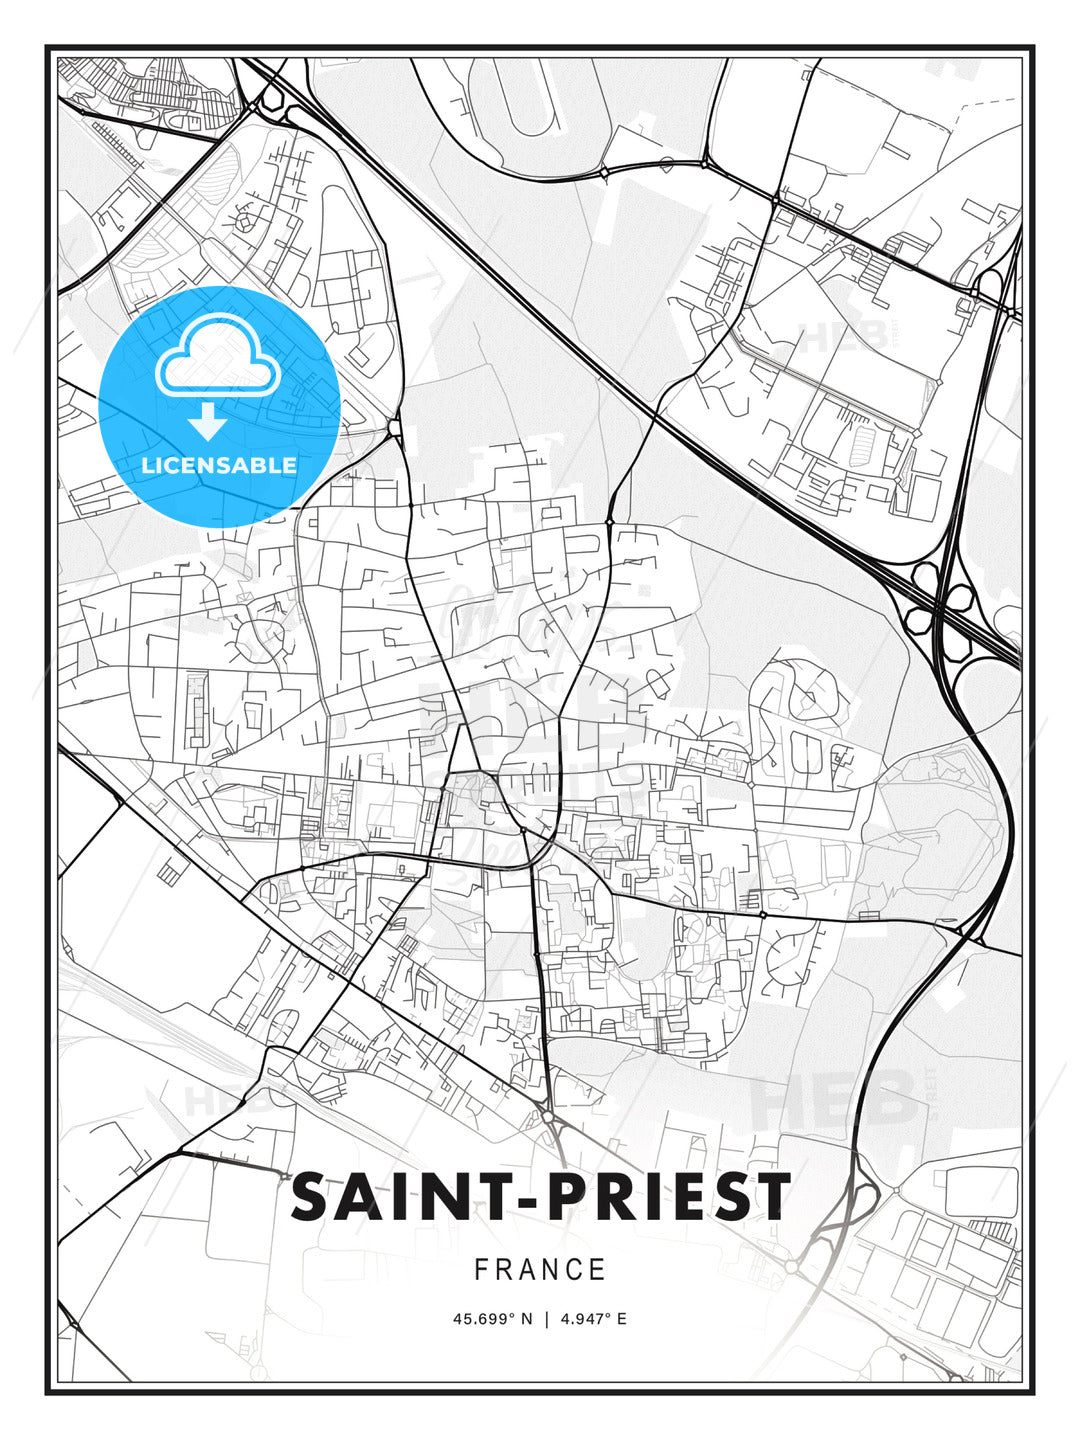 Saint-Priest, France, Modern Print Template in Various Formats - HEBSTREITS Sketches